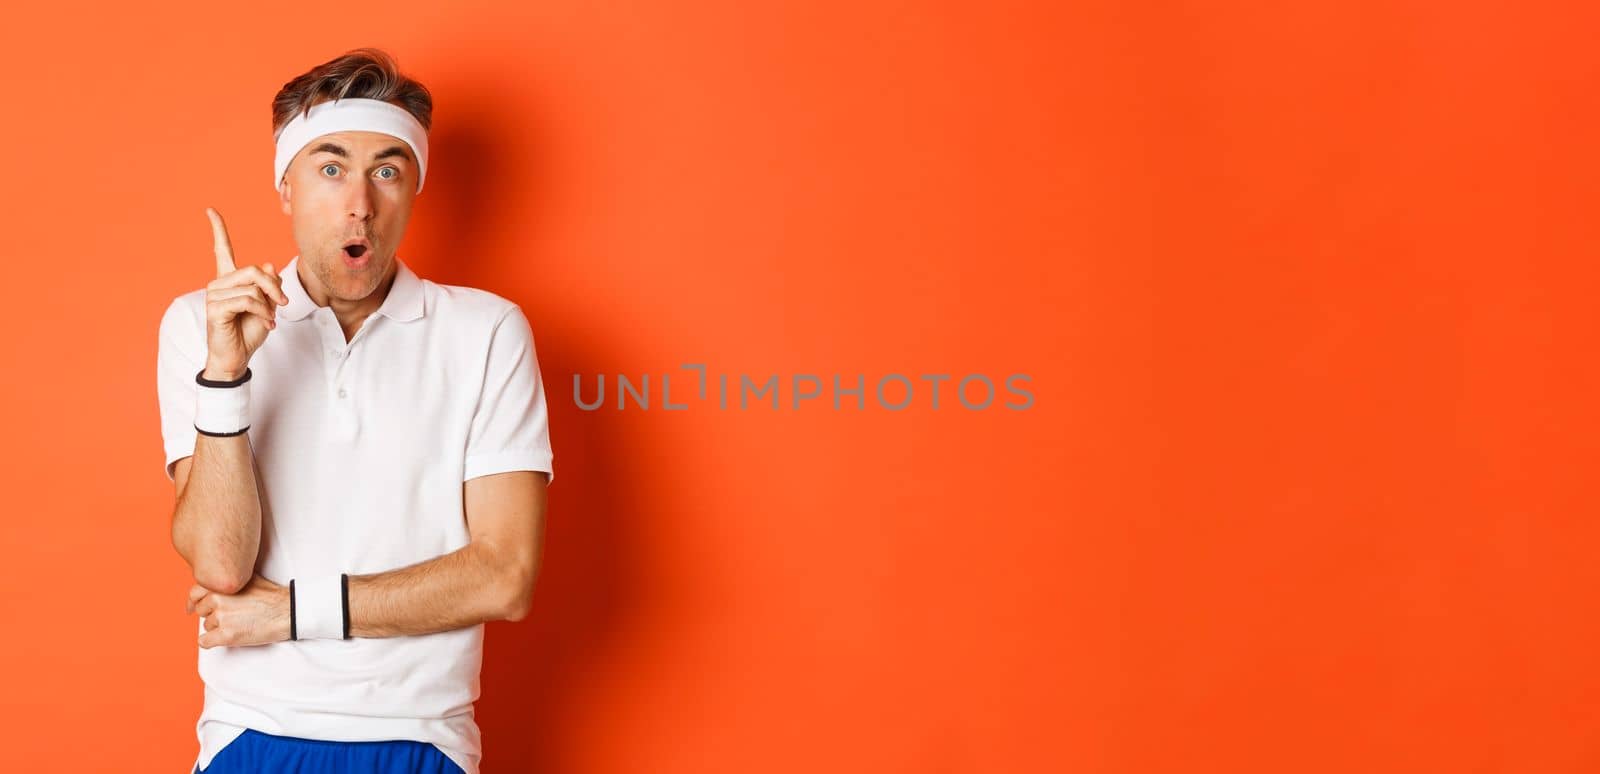 Concept of workout, sports and lifestyle. Portrait of handsome middle-aged male athlete, having an idea, raising finger up and saying suggestion, standing over orange background.